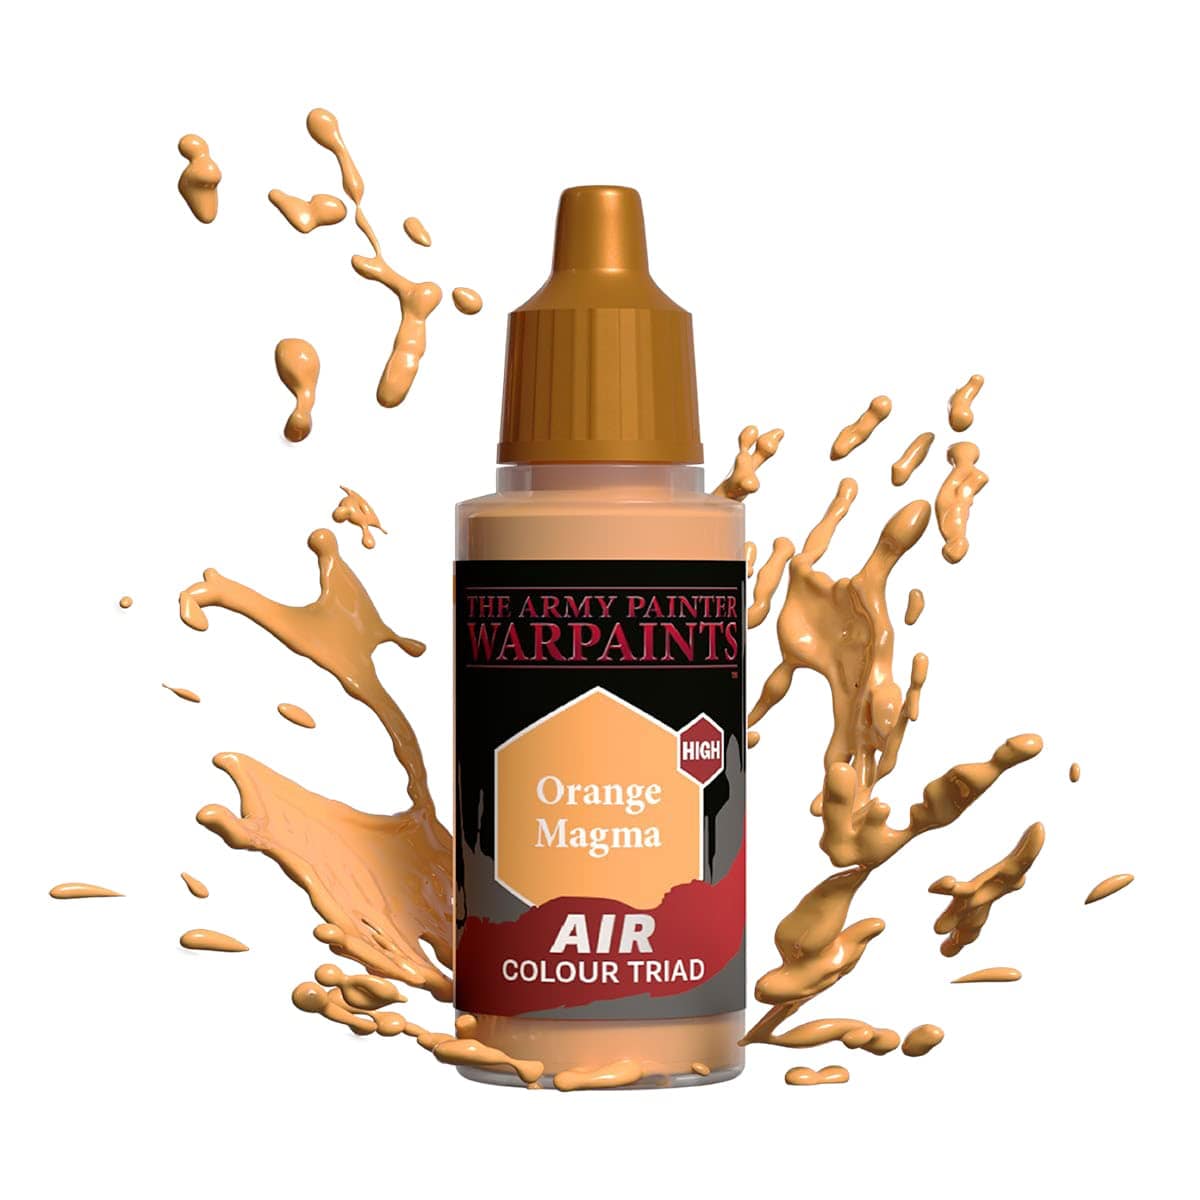 The Army Painter Accessories The Army Painter Warpaints Air: Orange Magma 18ml